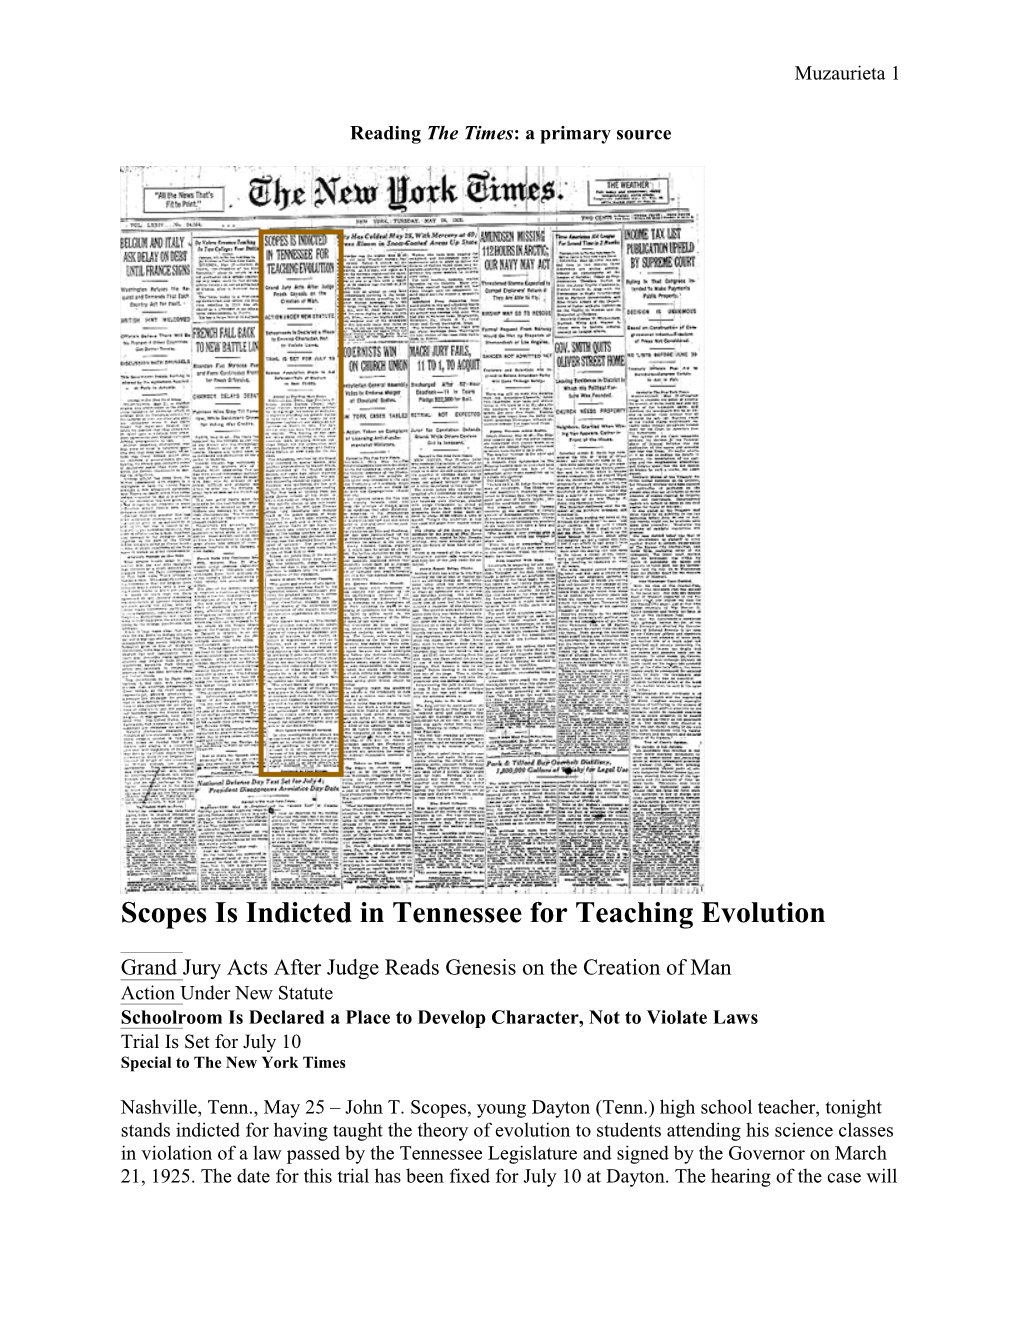 Reading the Times: a Primary Source